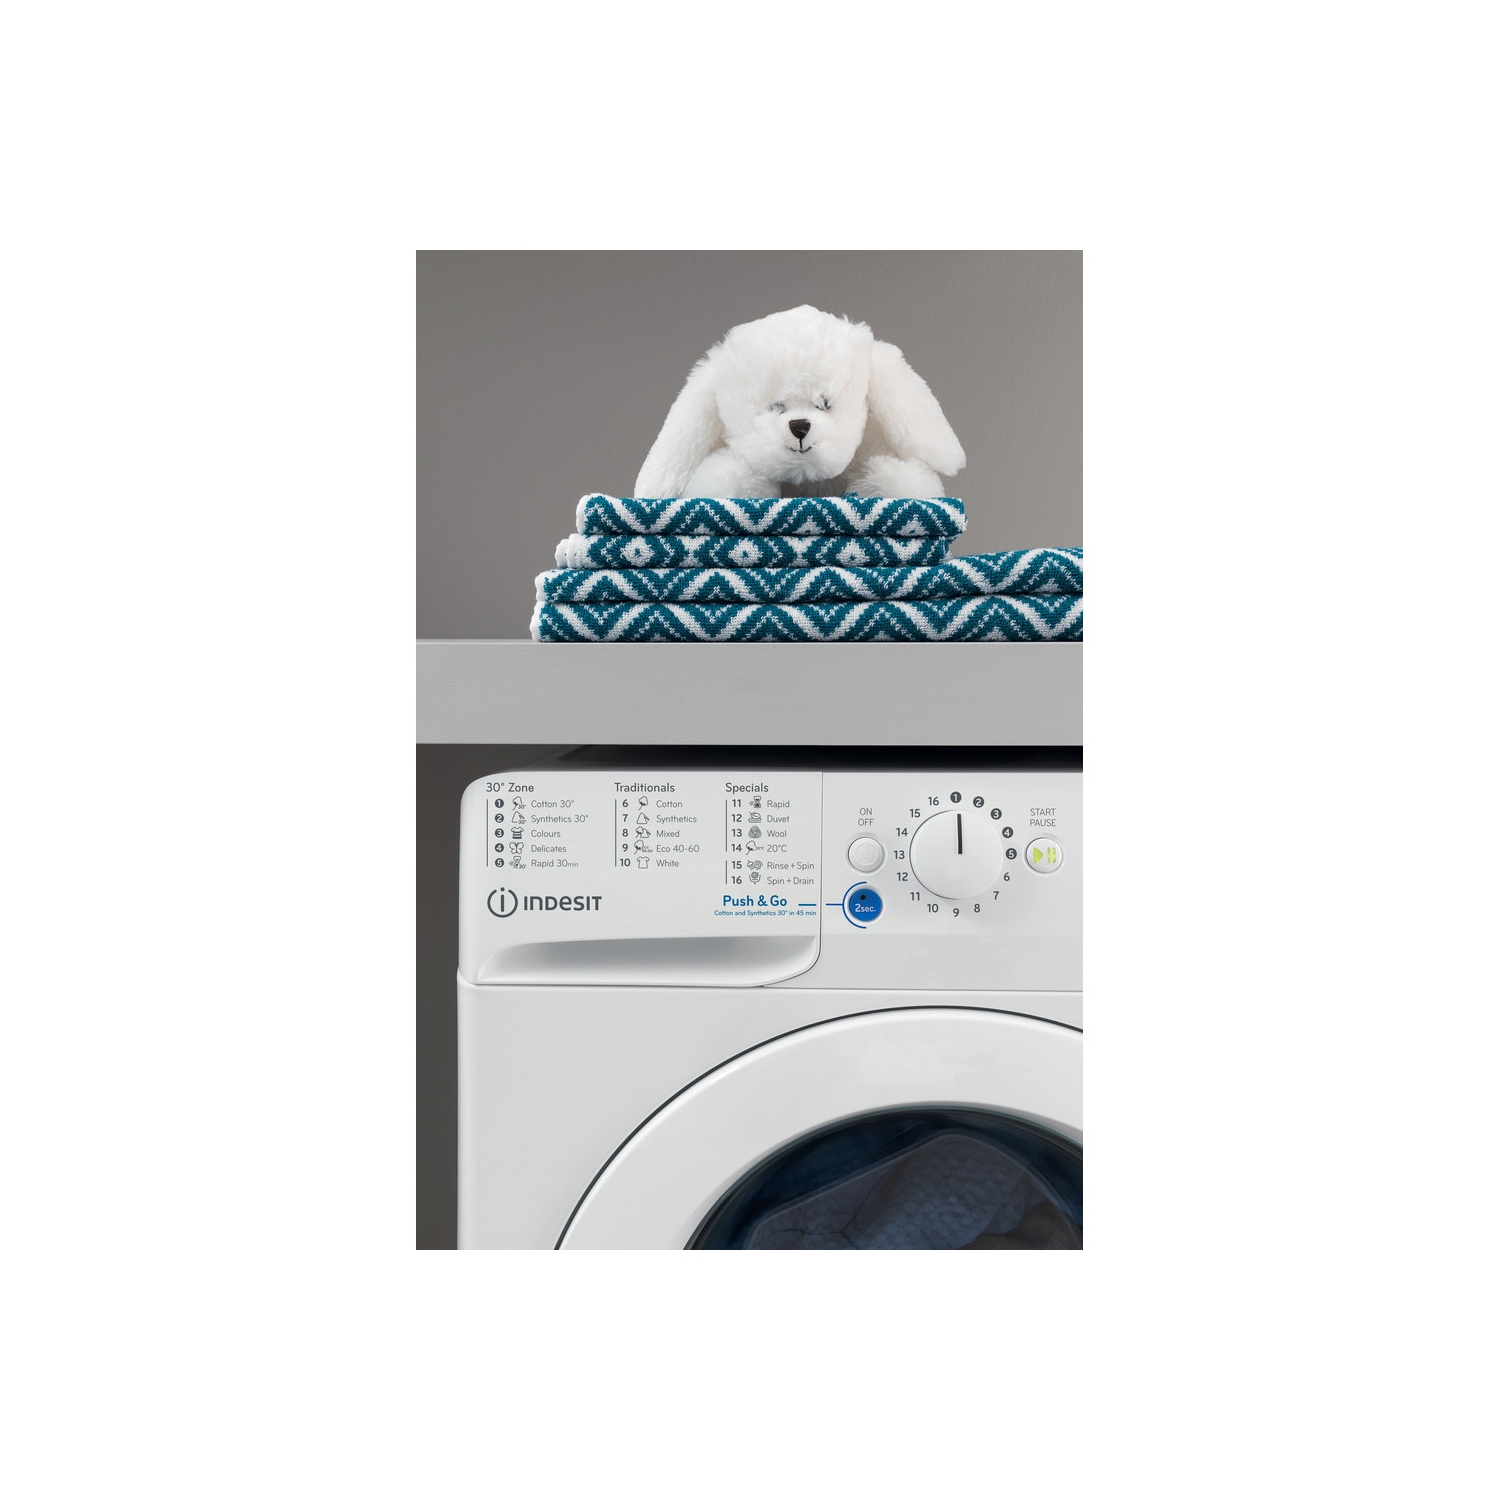 Indesit 7kg 1400 Spin Washing Machine - White - A+++ Rated - 2